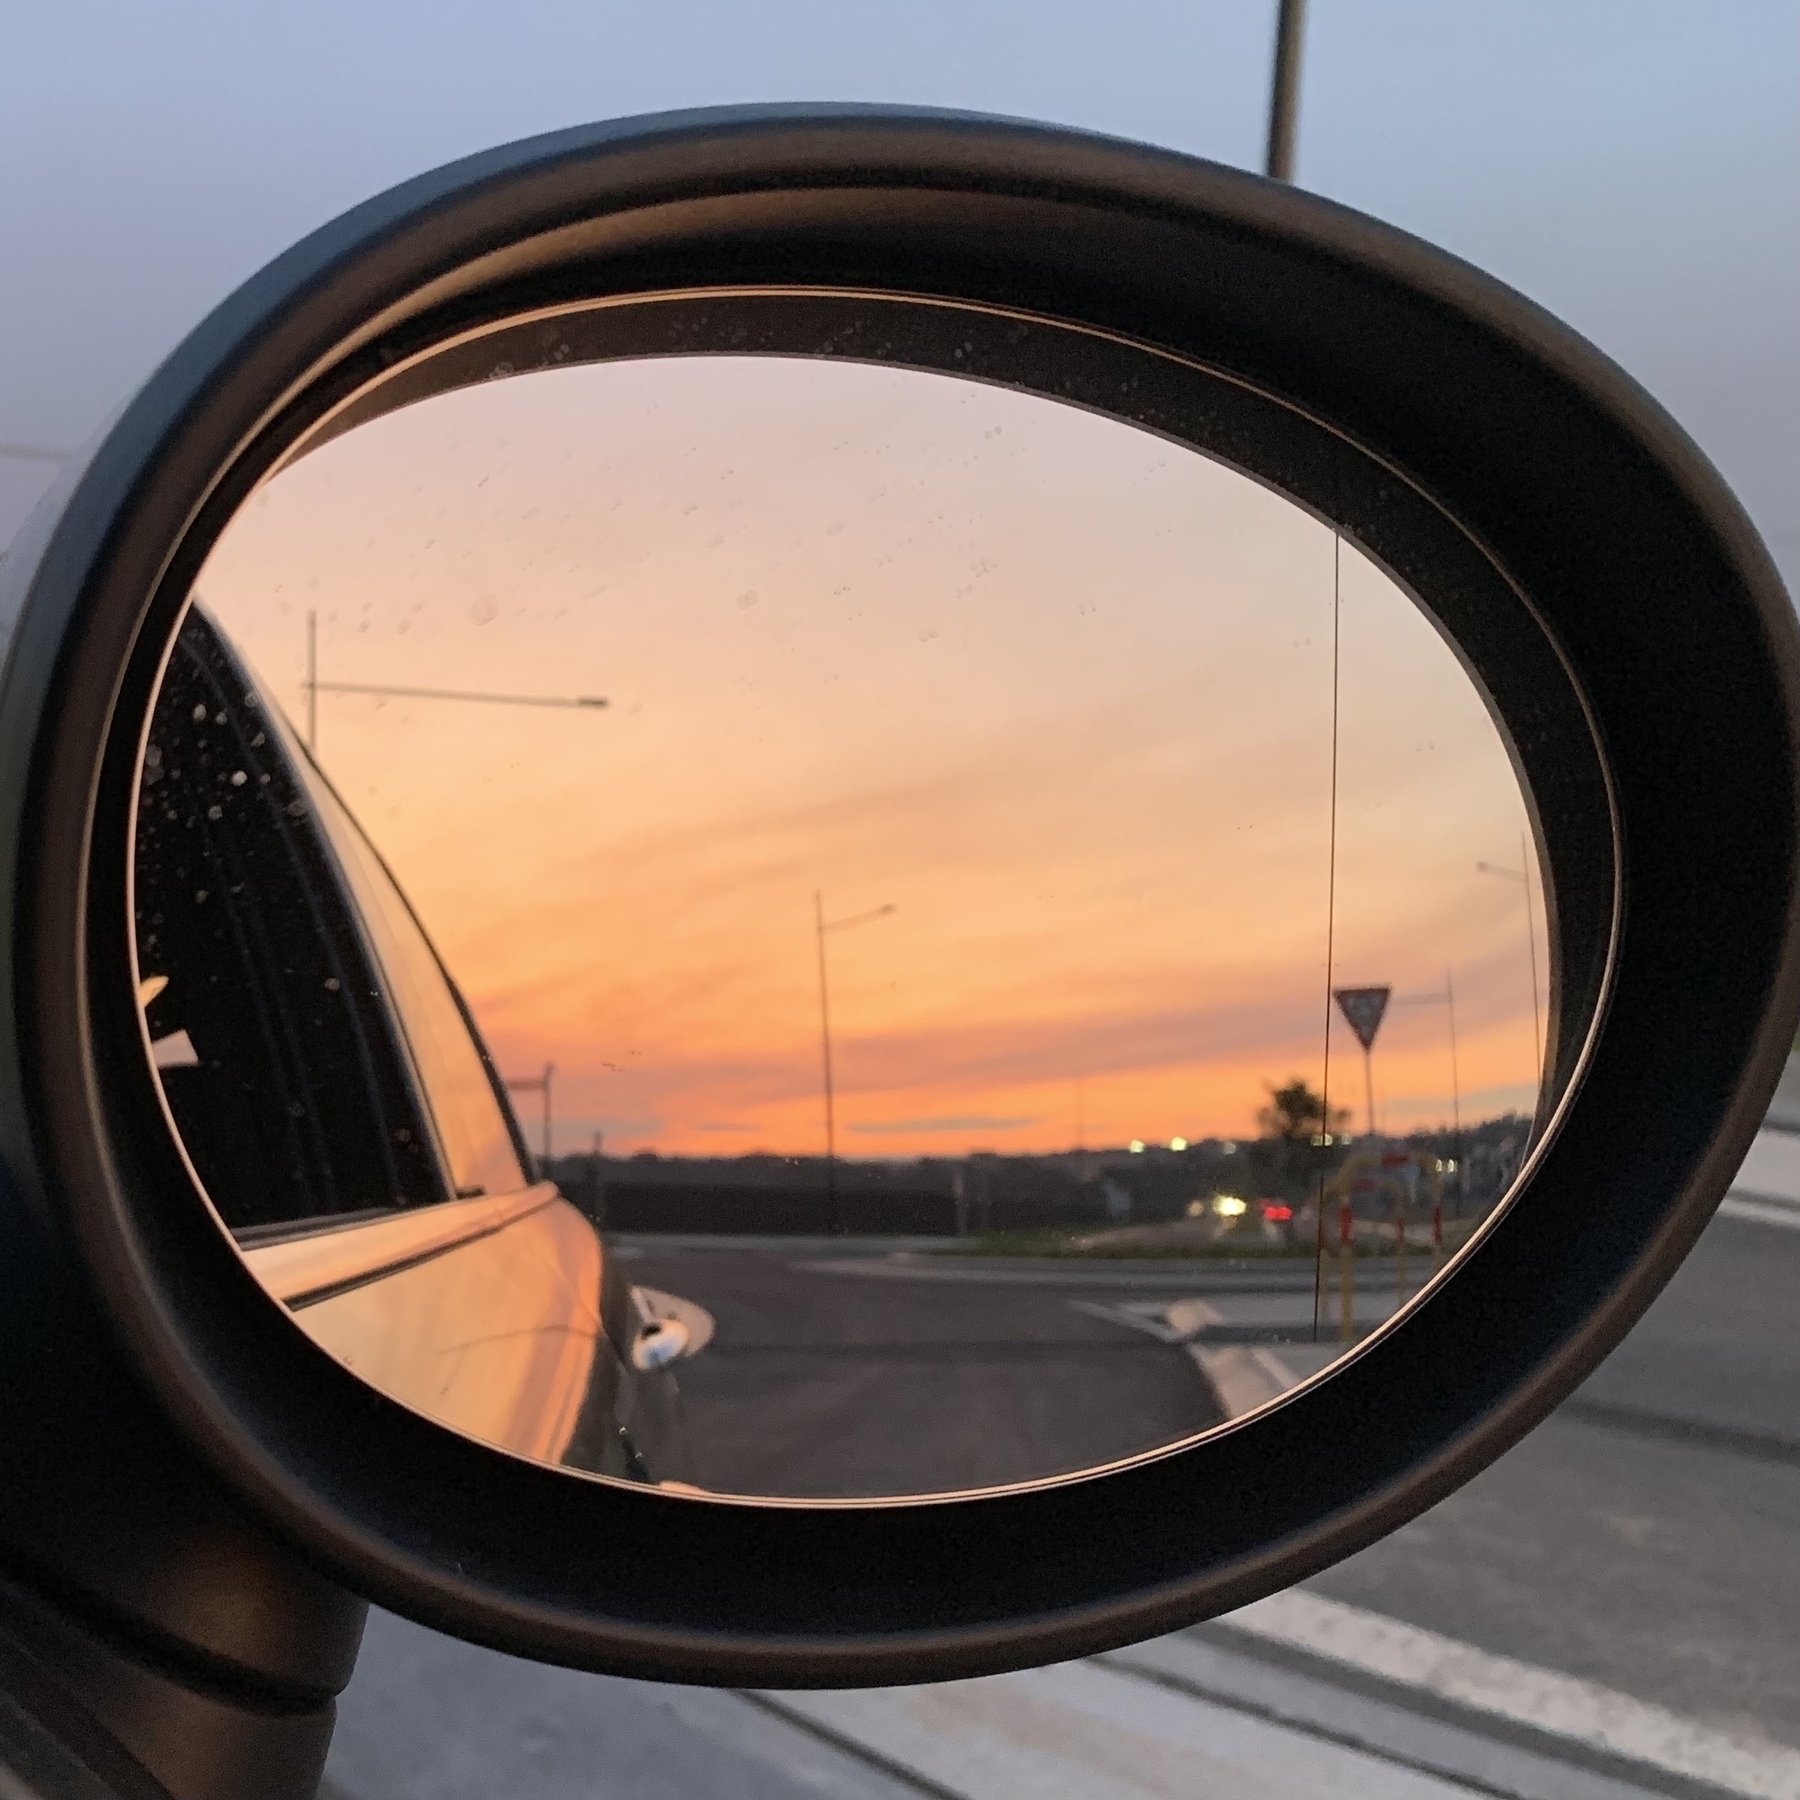 Looking back at the sunset in the side mirror of my mum’s sporty little Mini